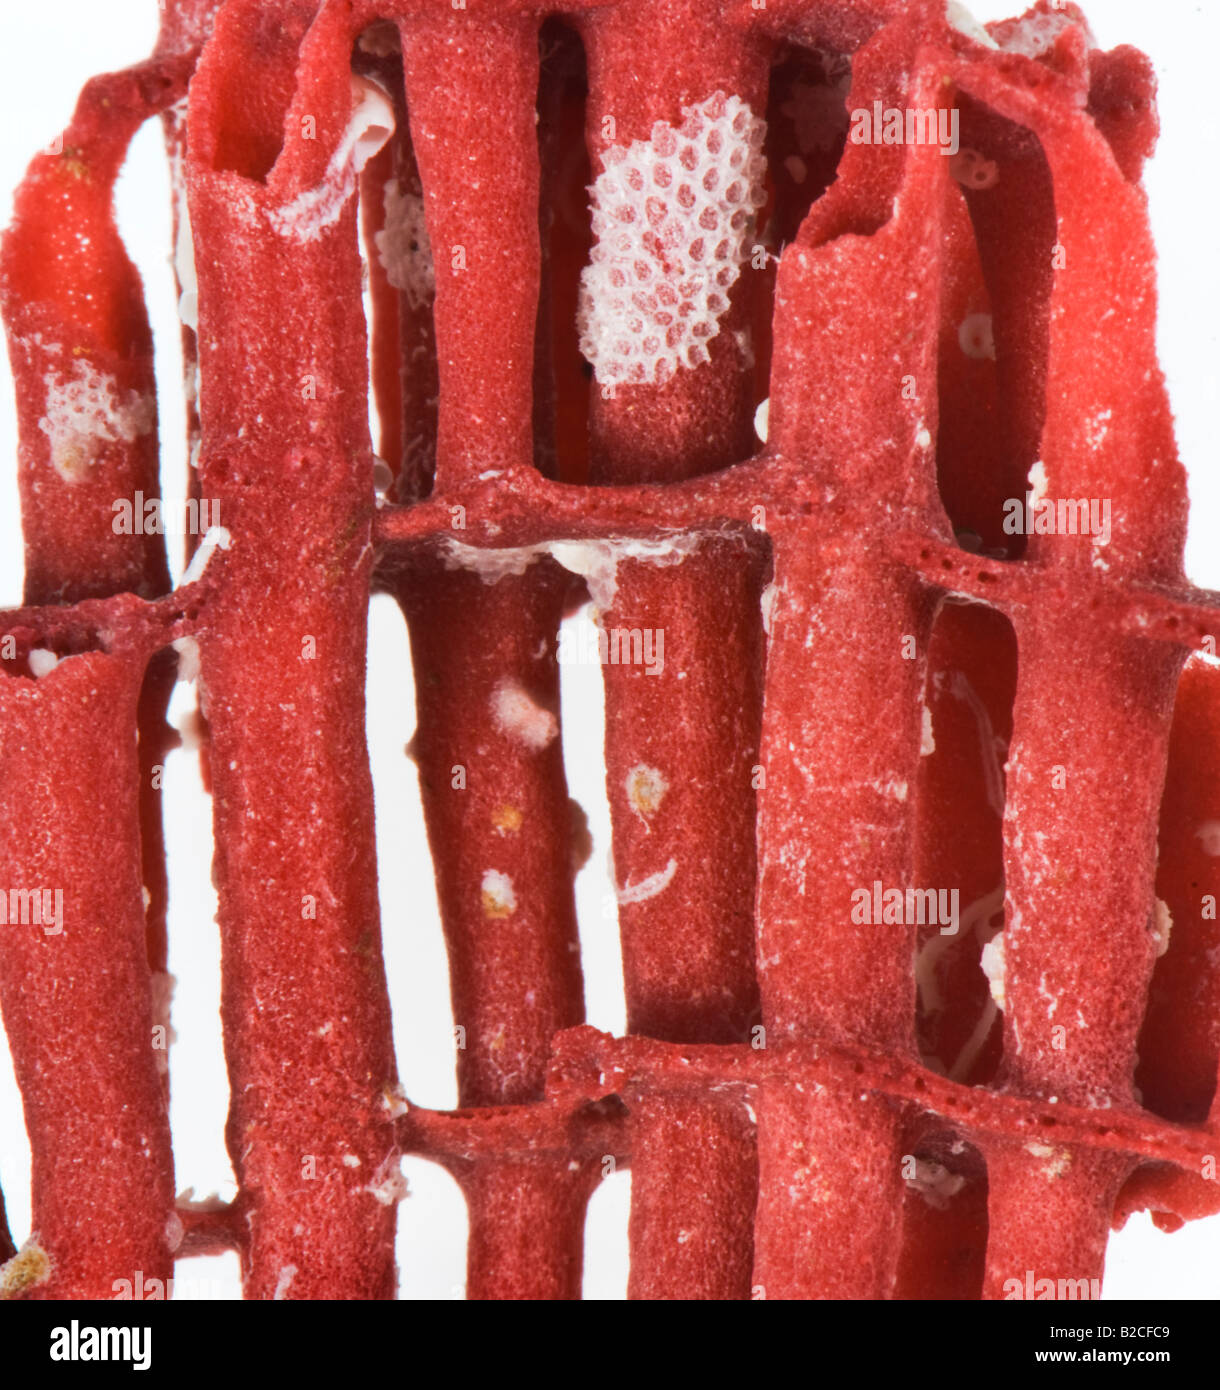 red coral KORALLE skeleton DETAIL organ pipe structure network compound structure connection NATURE BUILDING construct construct Stock Photo